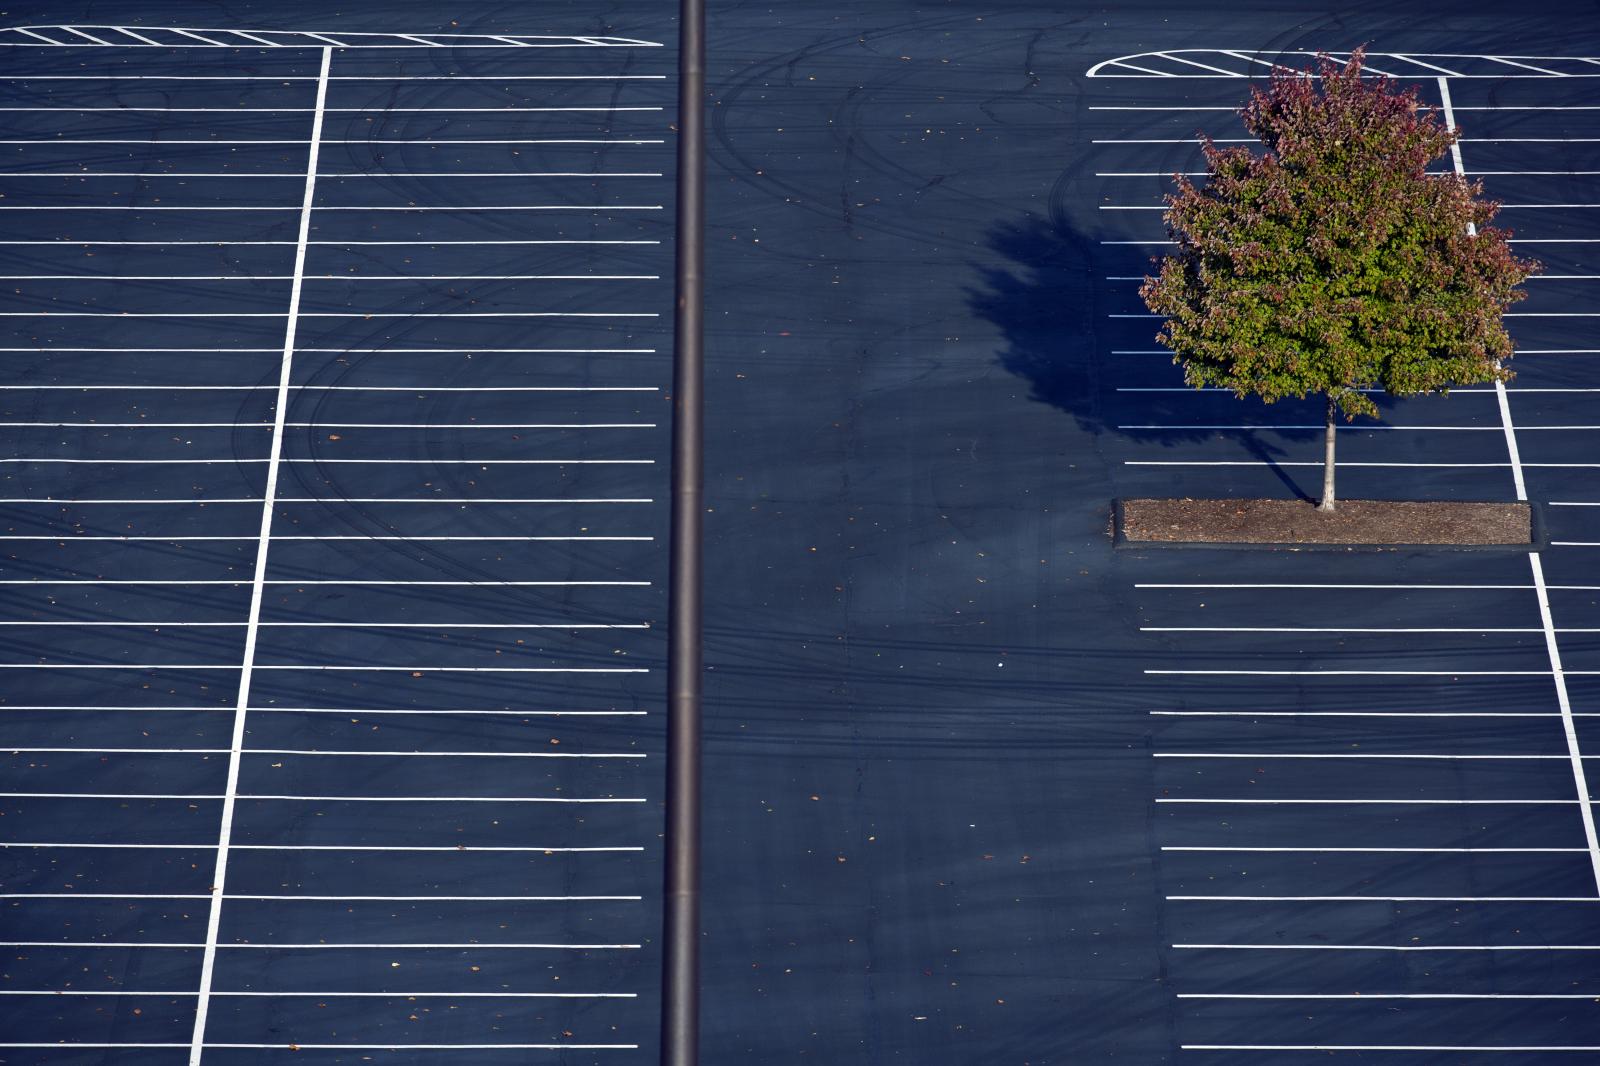 Parking lot with tree